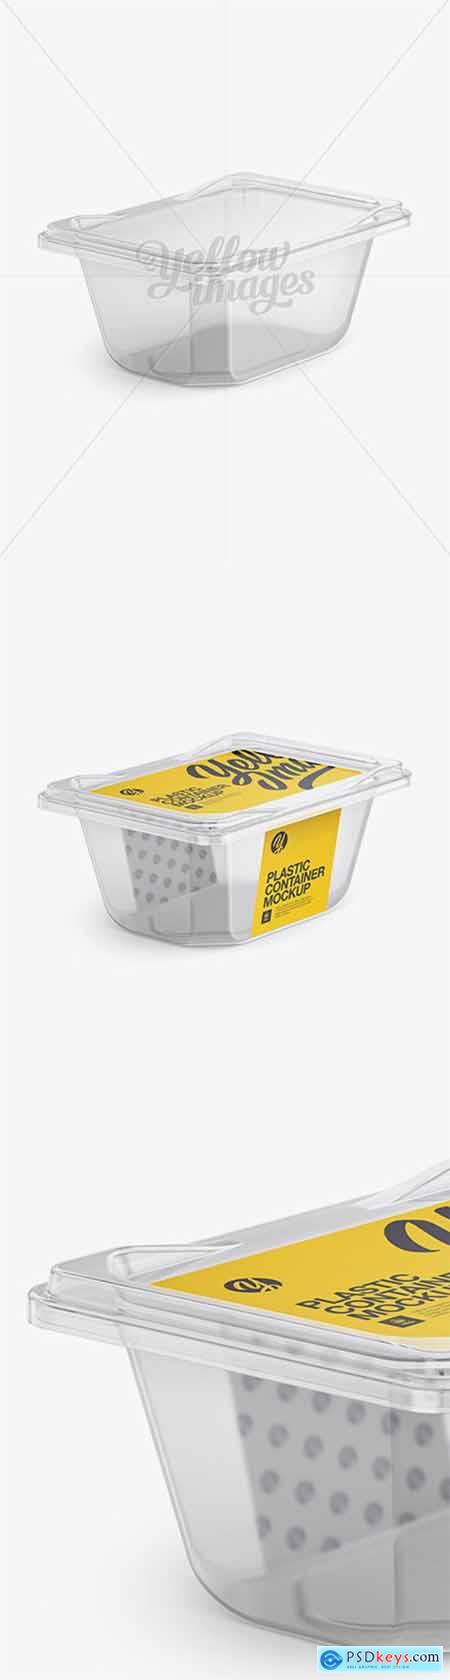 Transparent Plastic Container Mockup - Half Side View 18127